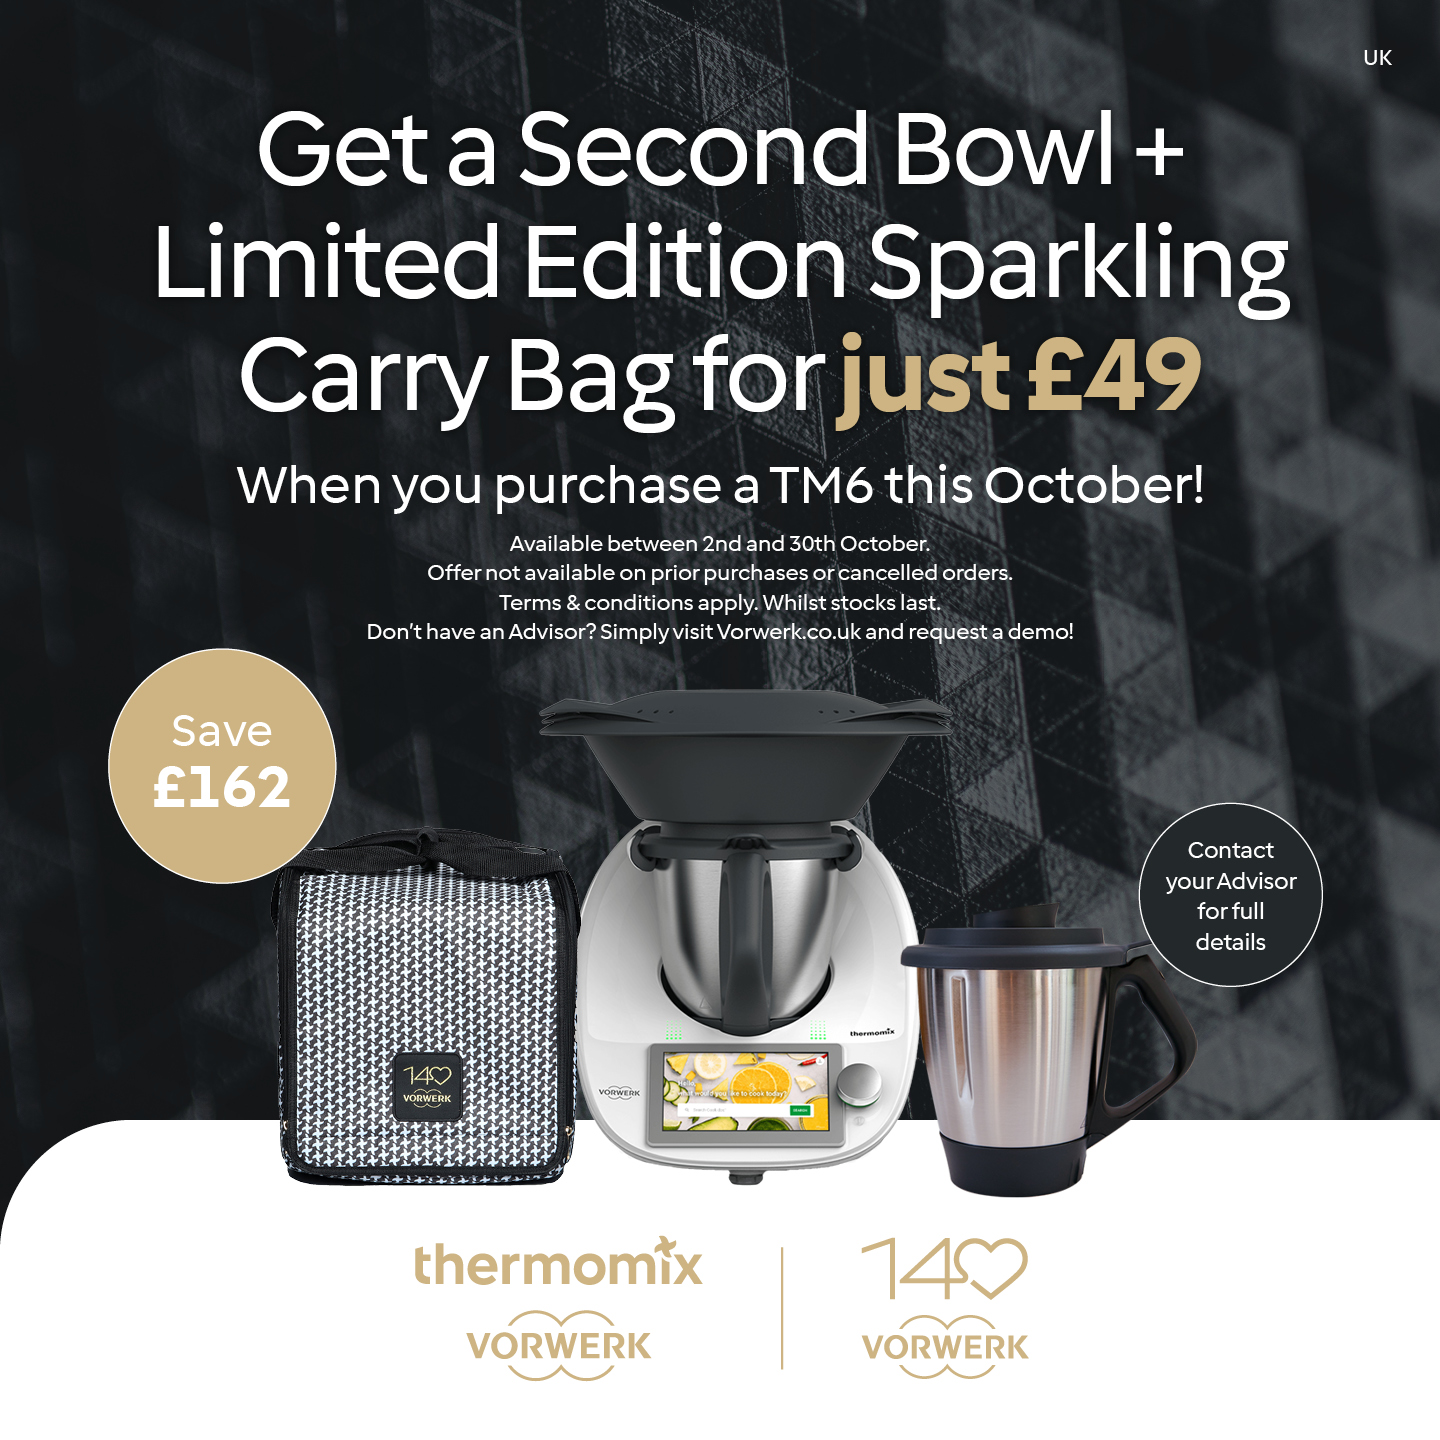 Thermomix® TM6 Complete Mixing Bowl Set